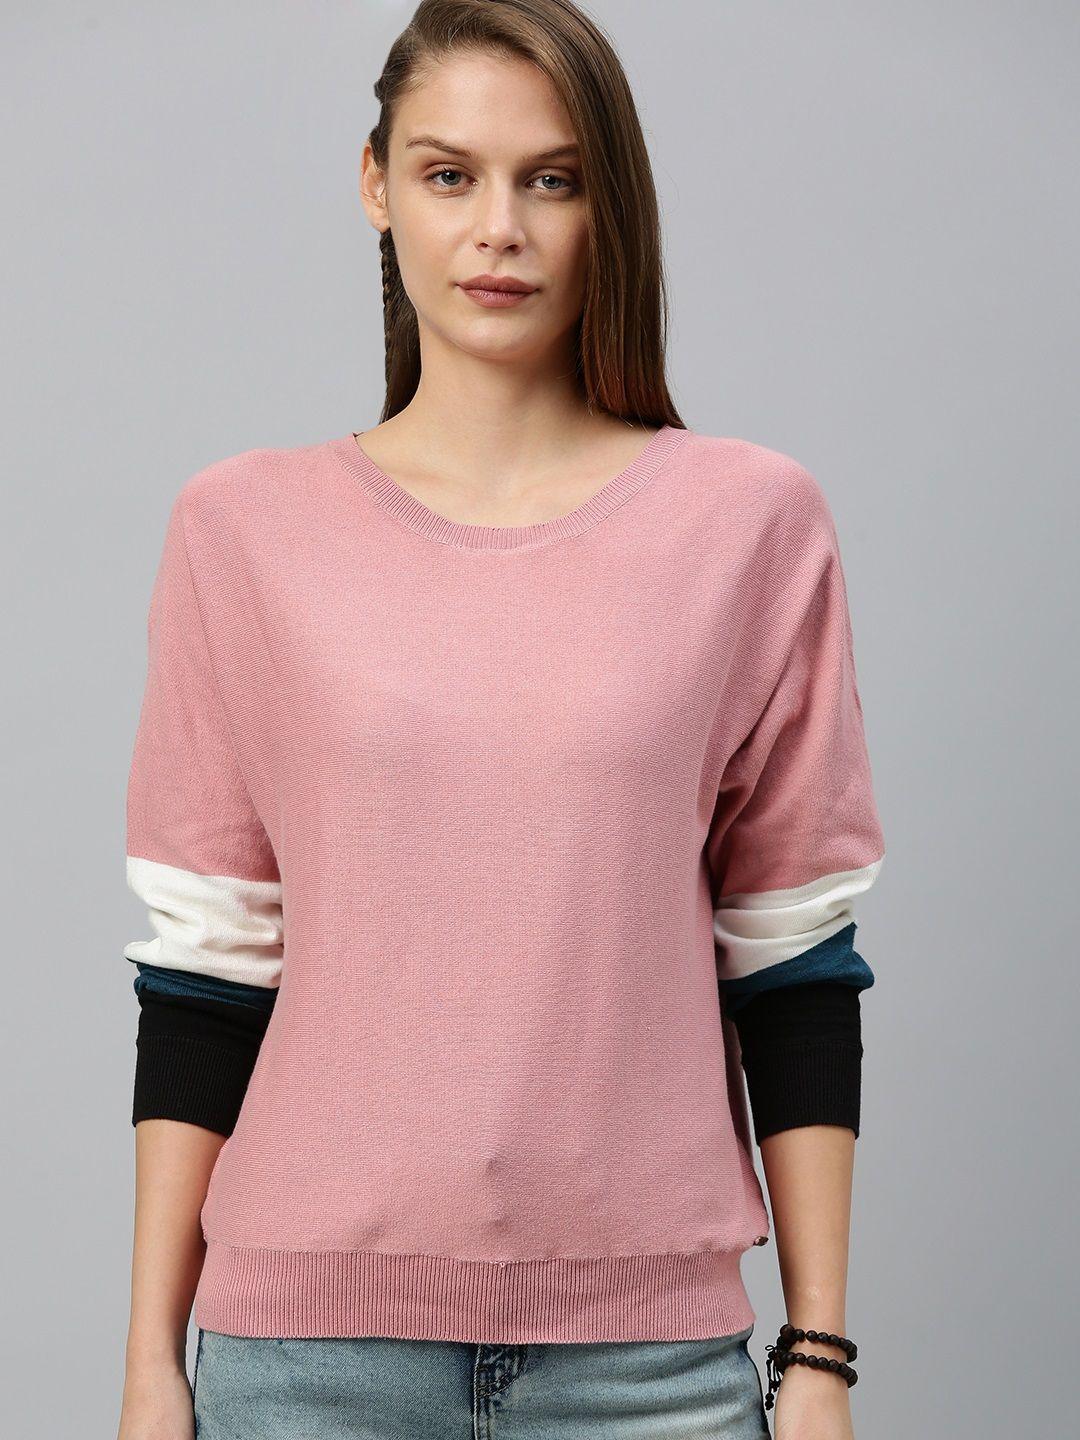 the roadster lifestyle co women pink solid pullover sweater with striped sleeves